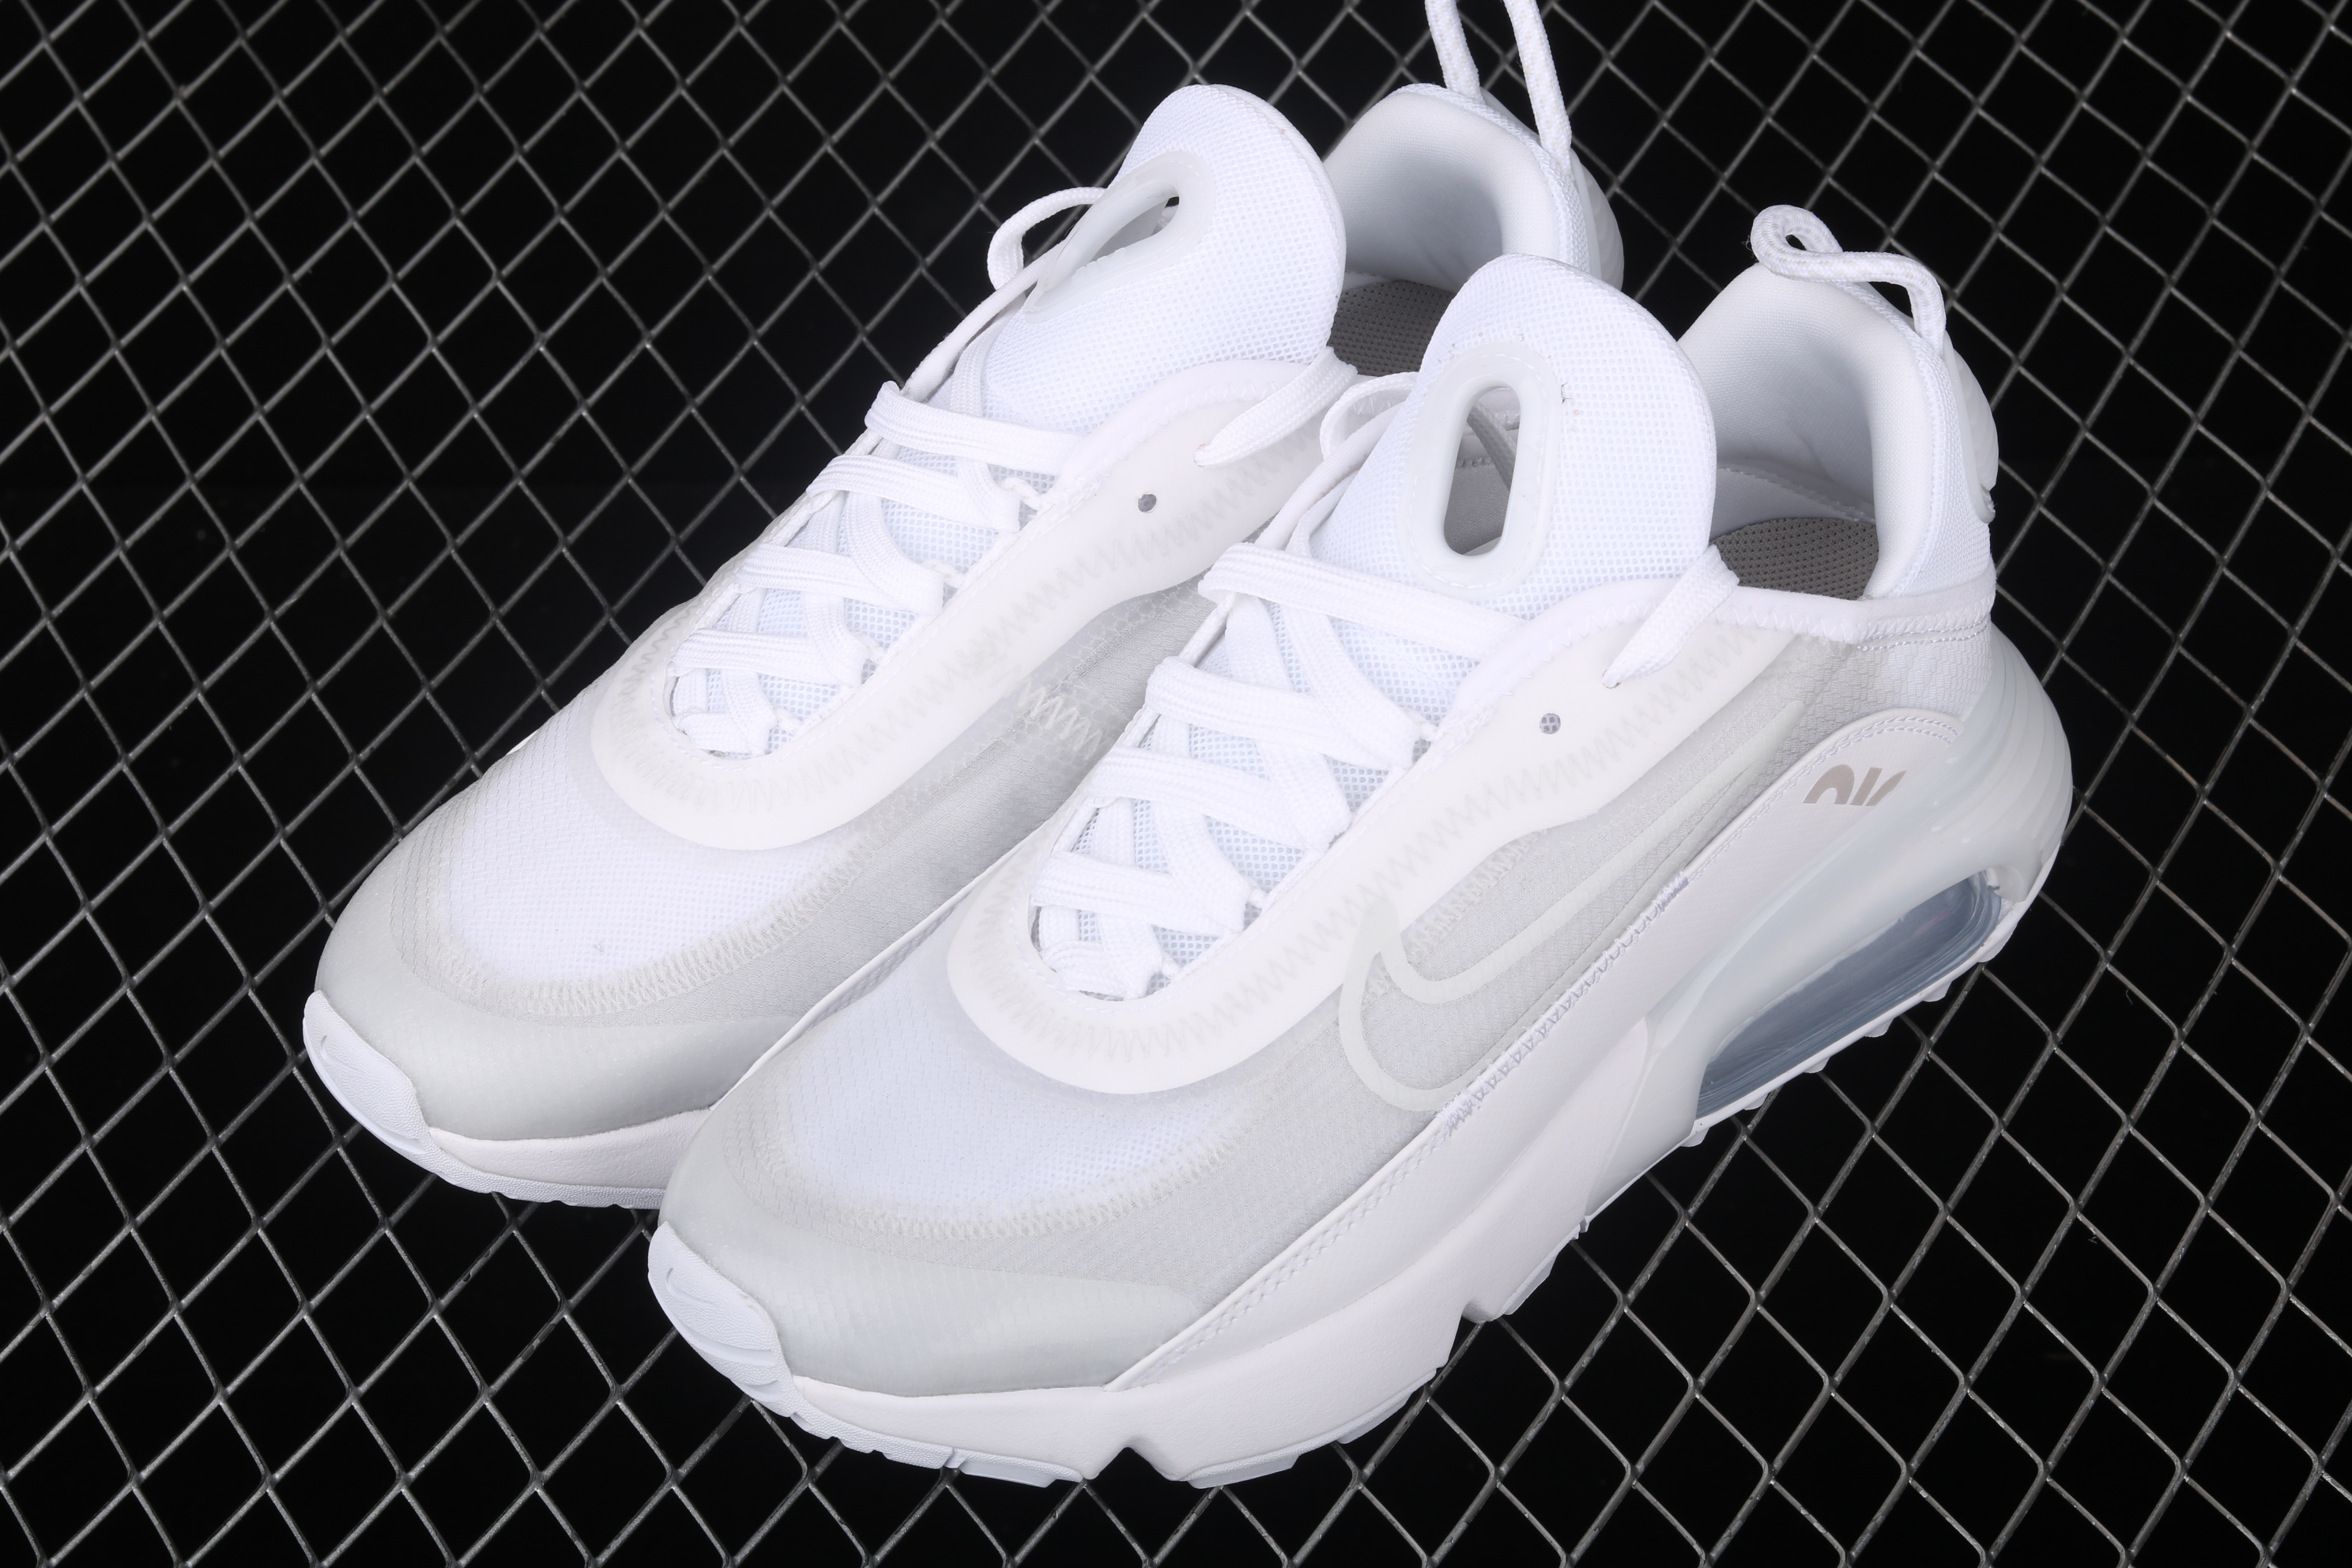 New Men Nike Air Max 2090 Pure White Running Shoes